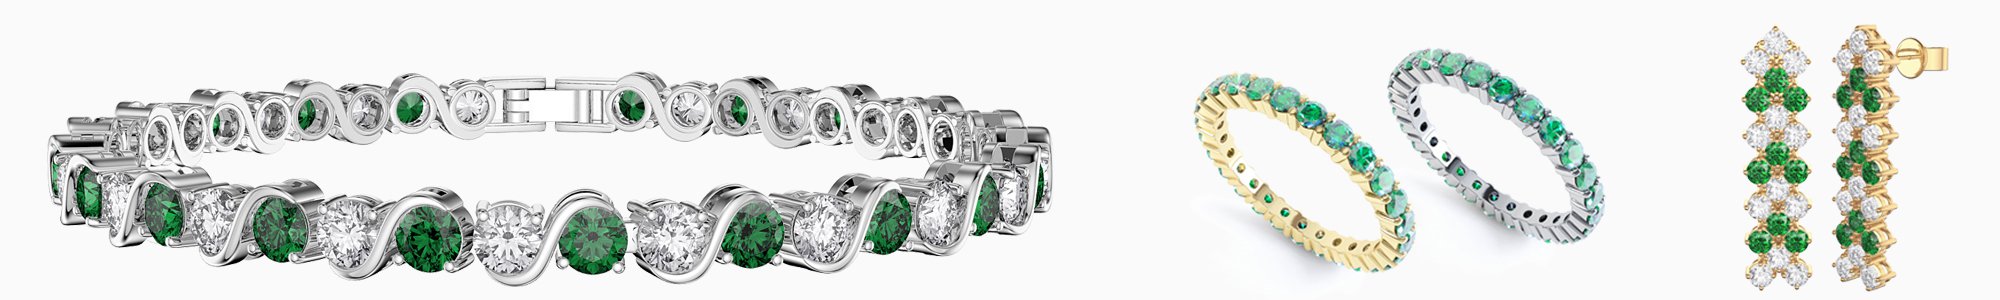 Emerald Jewelry - Wide Selection of Earrings, Pendants, Engagement Rings, Bracelets and Necklaces